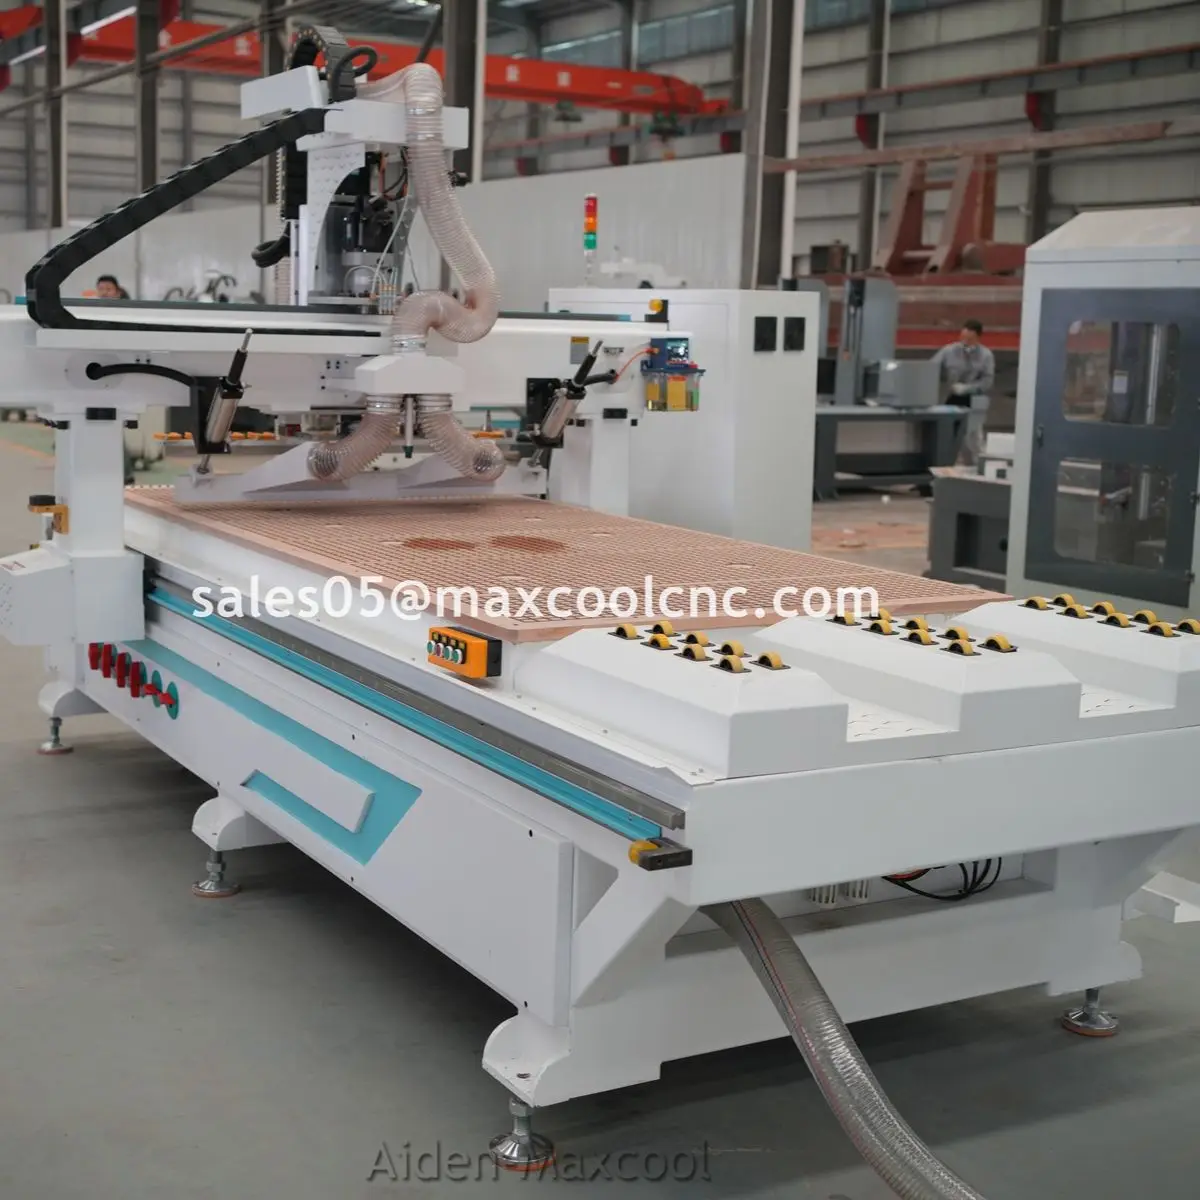 

Auto Tool Change Woodworking CNC Router 1325 1530 2030 Wood MDF Door Foam 3 4 Axis ATC Engraving Cutting Milling Machine